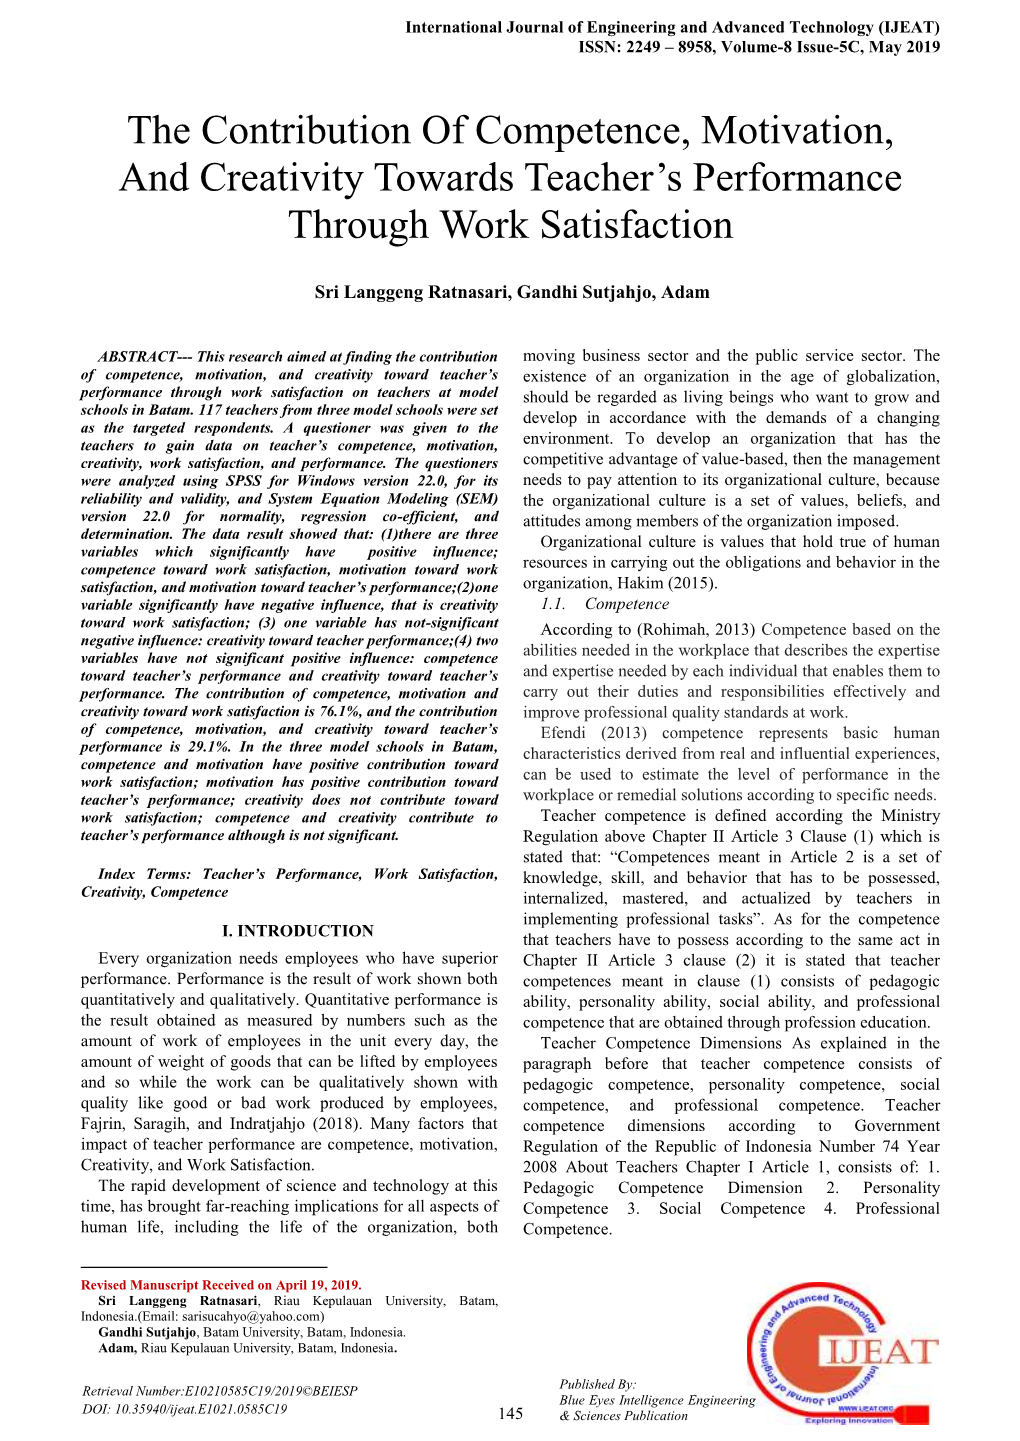 The Contribution of Competence, Motivation, and Creativity Towards Teacher’S Performance Through Work Satisfaction